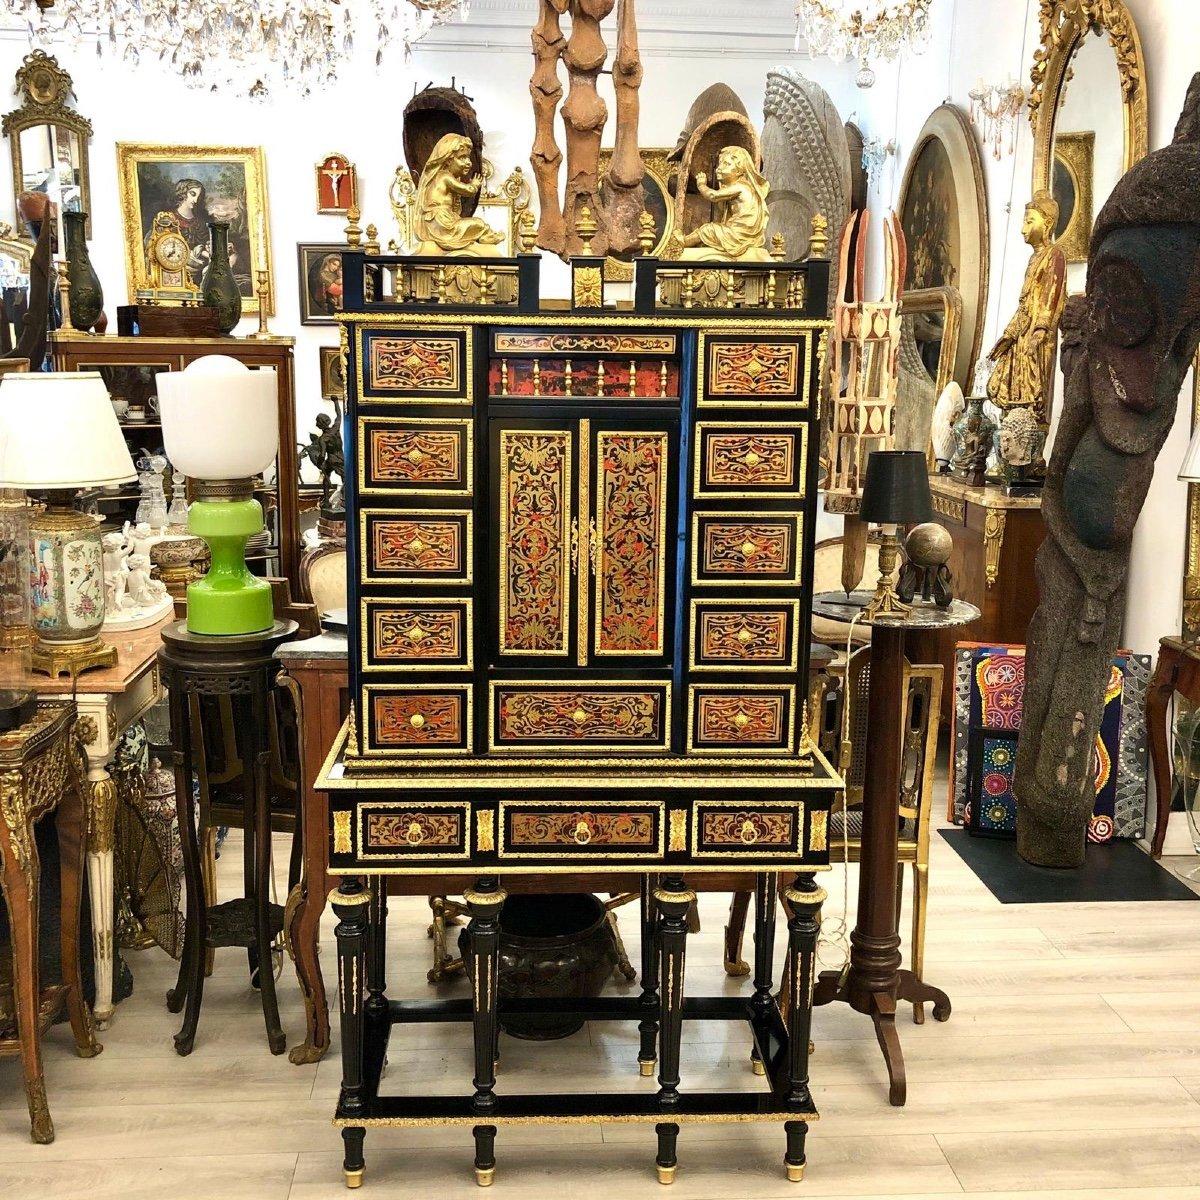 Presenting you this splendid cabinet in Boulle-style marquetry from the mid-20th century. It opens with ten small drawers, a large middle drawer, and two doors. It is further topped with a highly decorative gallery featuring gilt bronze colonettes